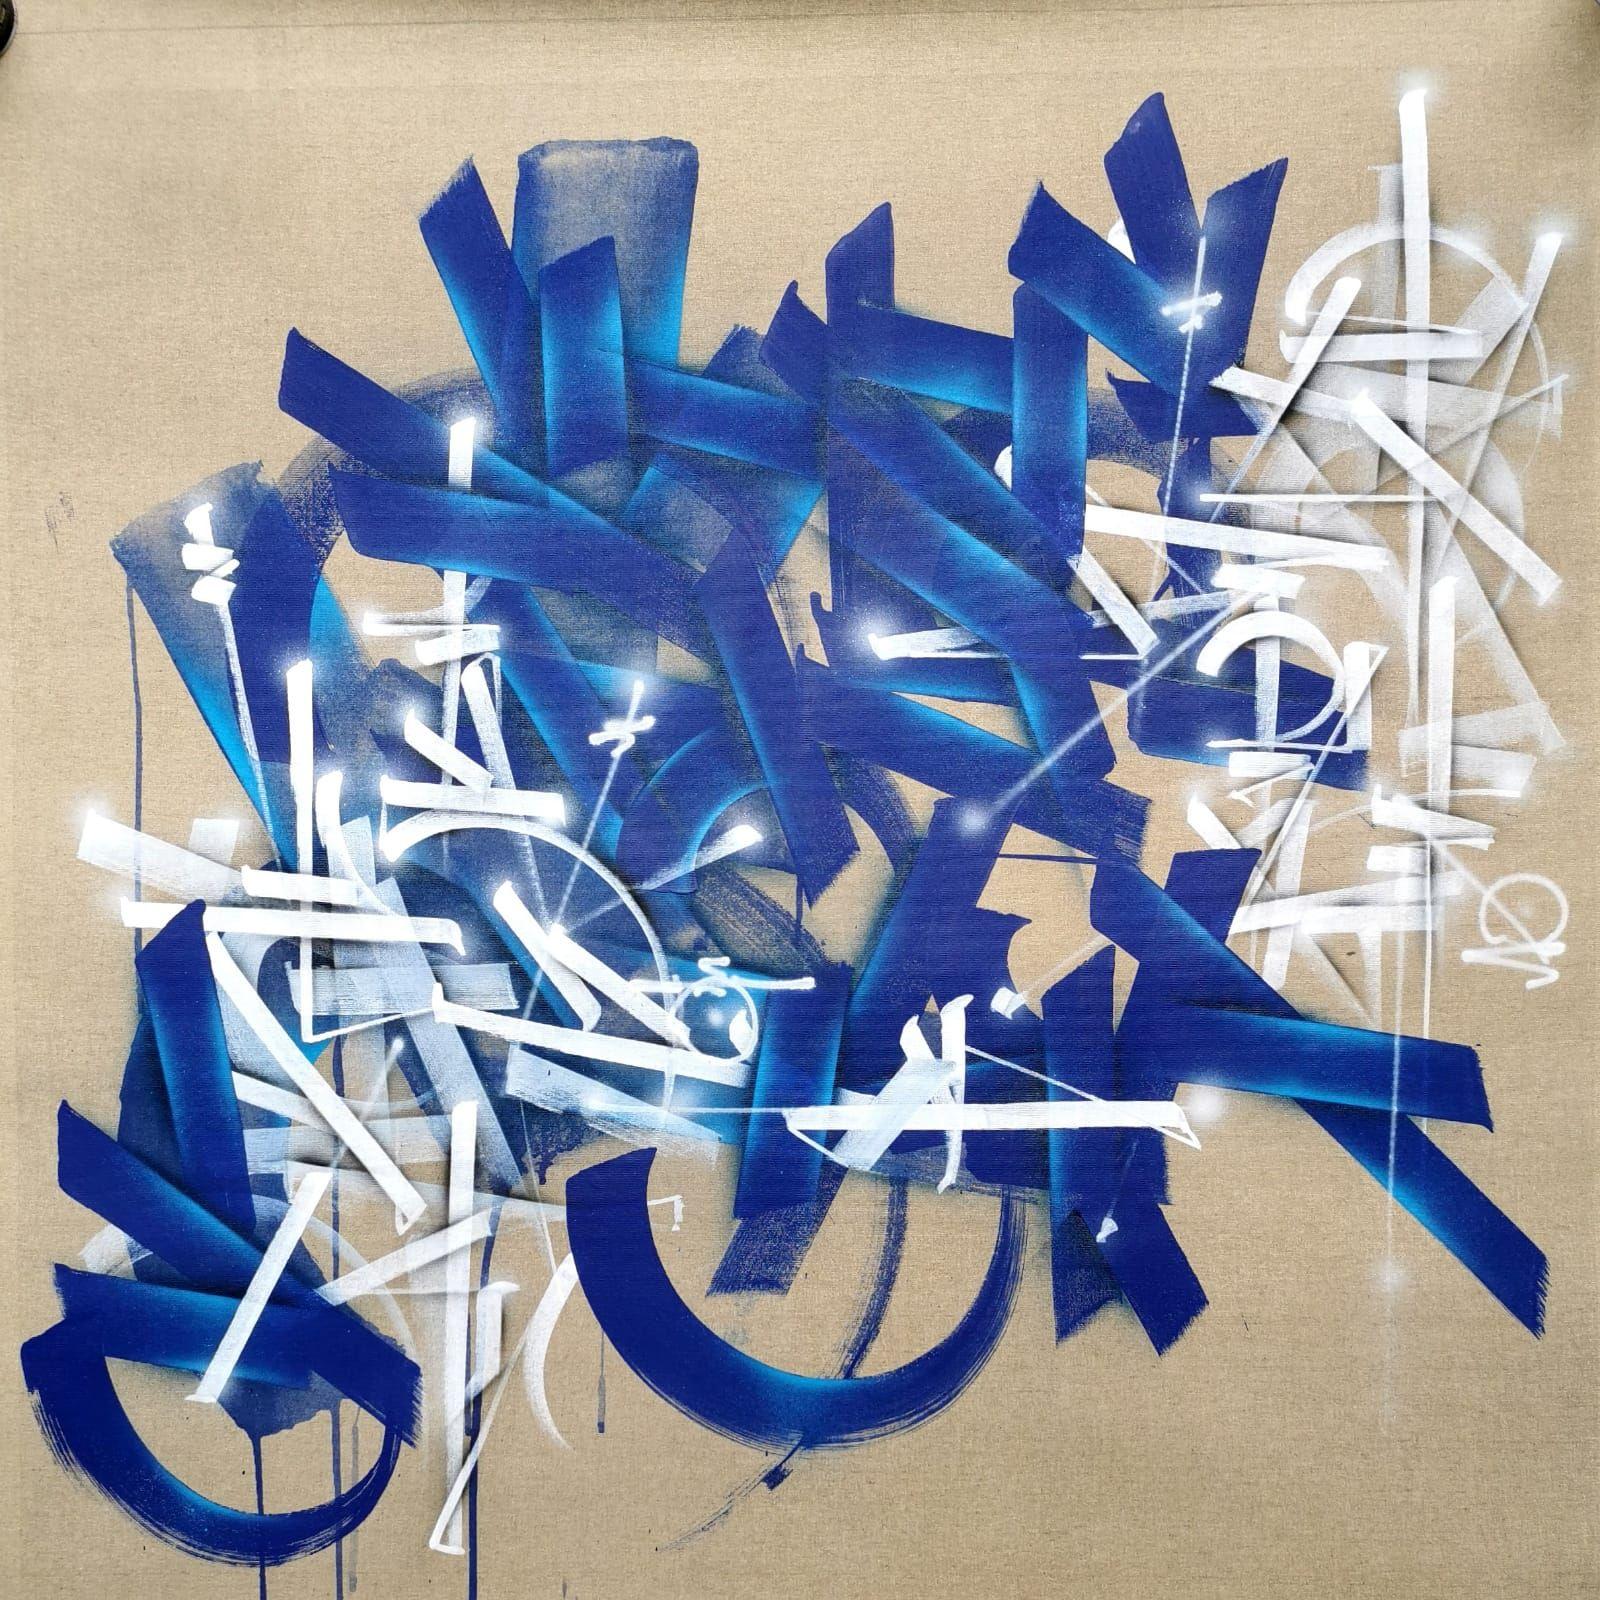 Soklak Abstract Painting - DMVT 0105, Abstract and Calligraphic art by French Street Artist SOKLAK